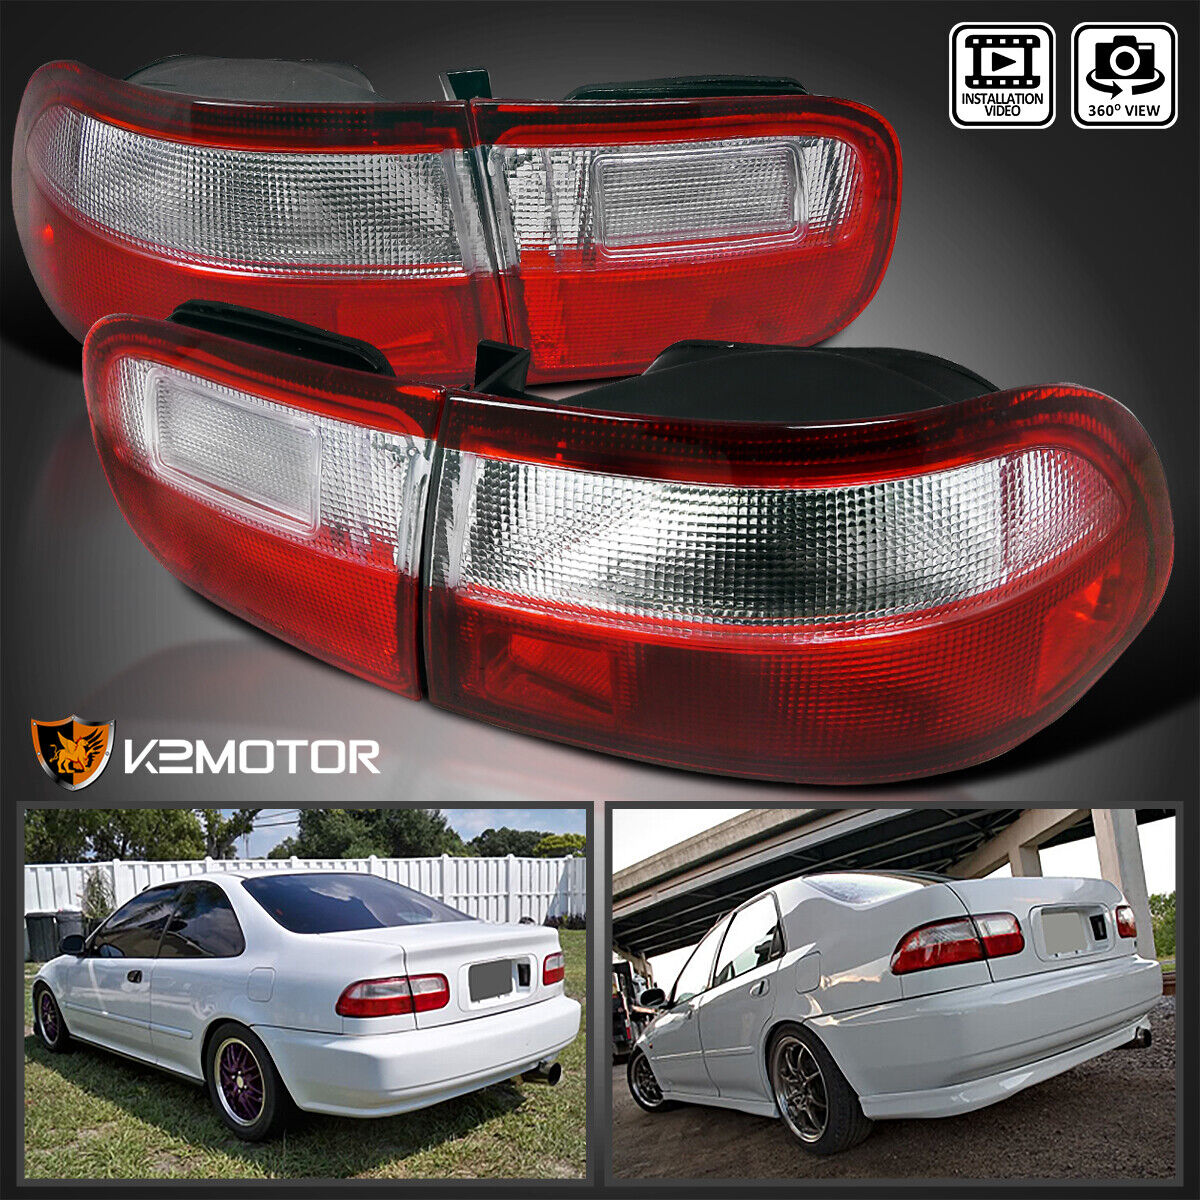 Red/Clear Fits 92-95 Honda Civic 2Dr 4Dr Tail Lights Brake Lamps Left+Right Pair